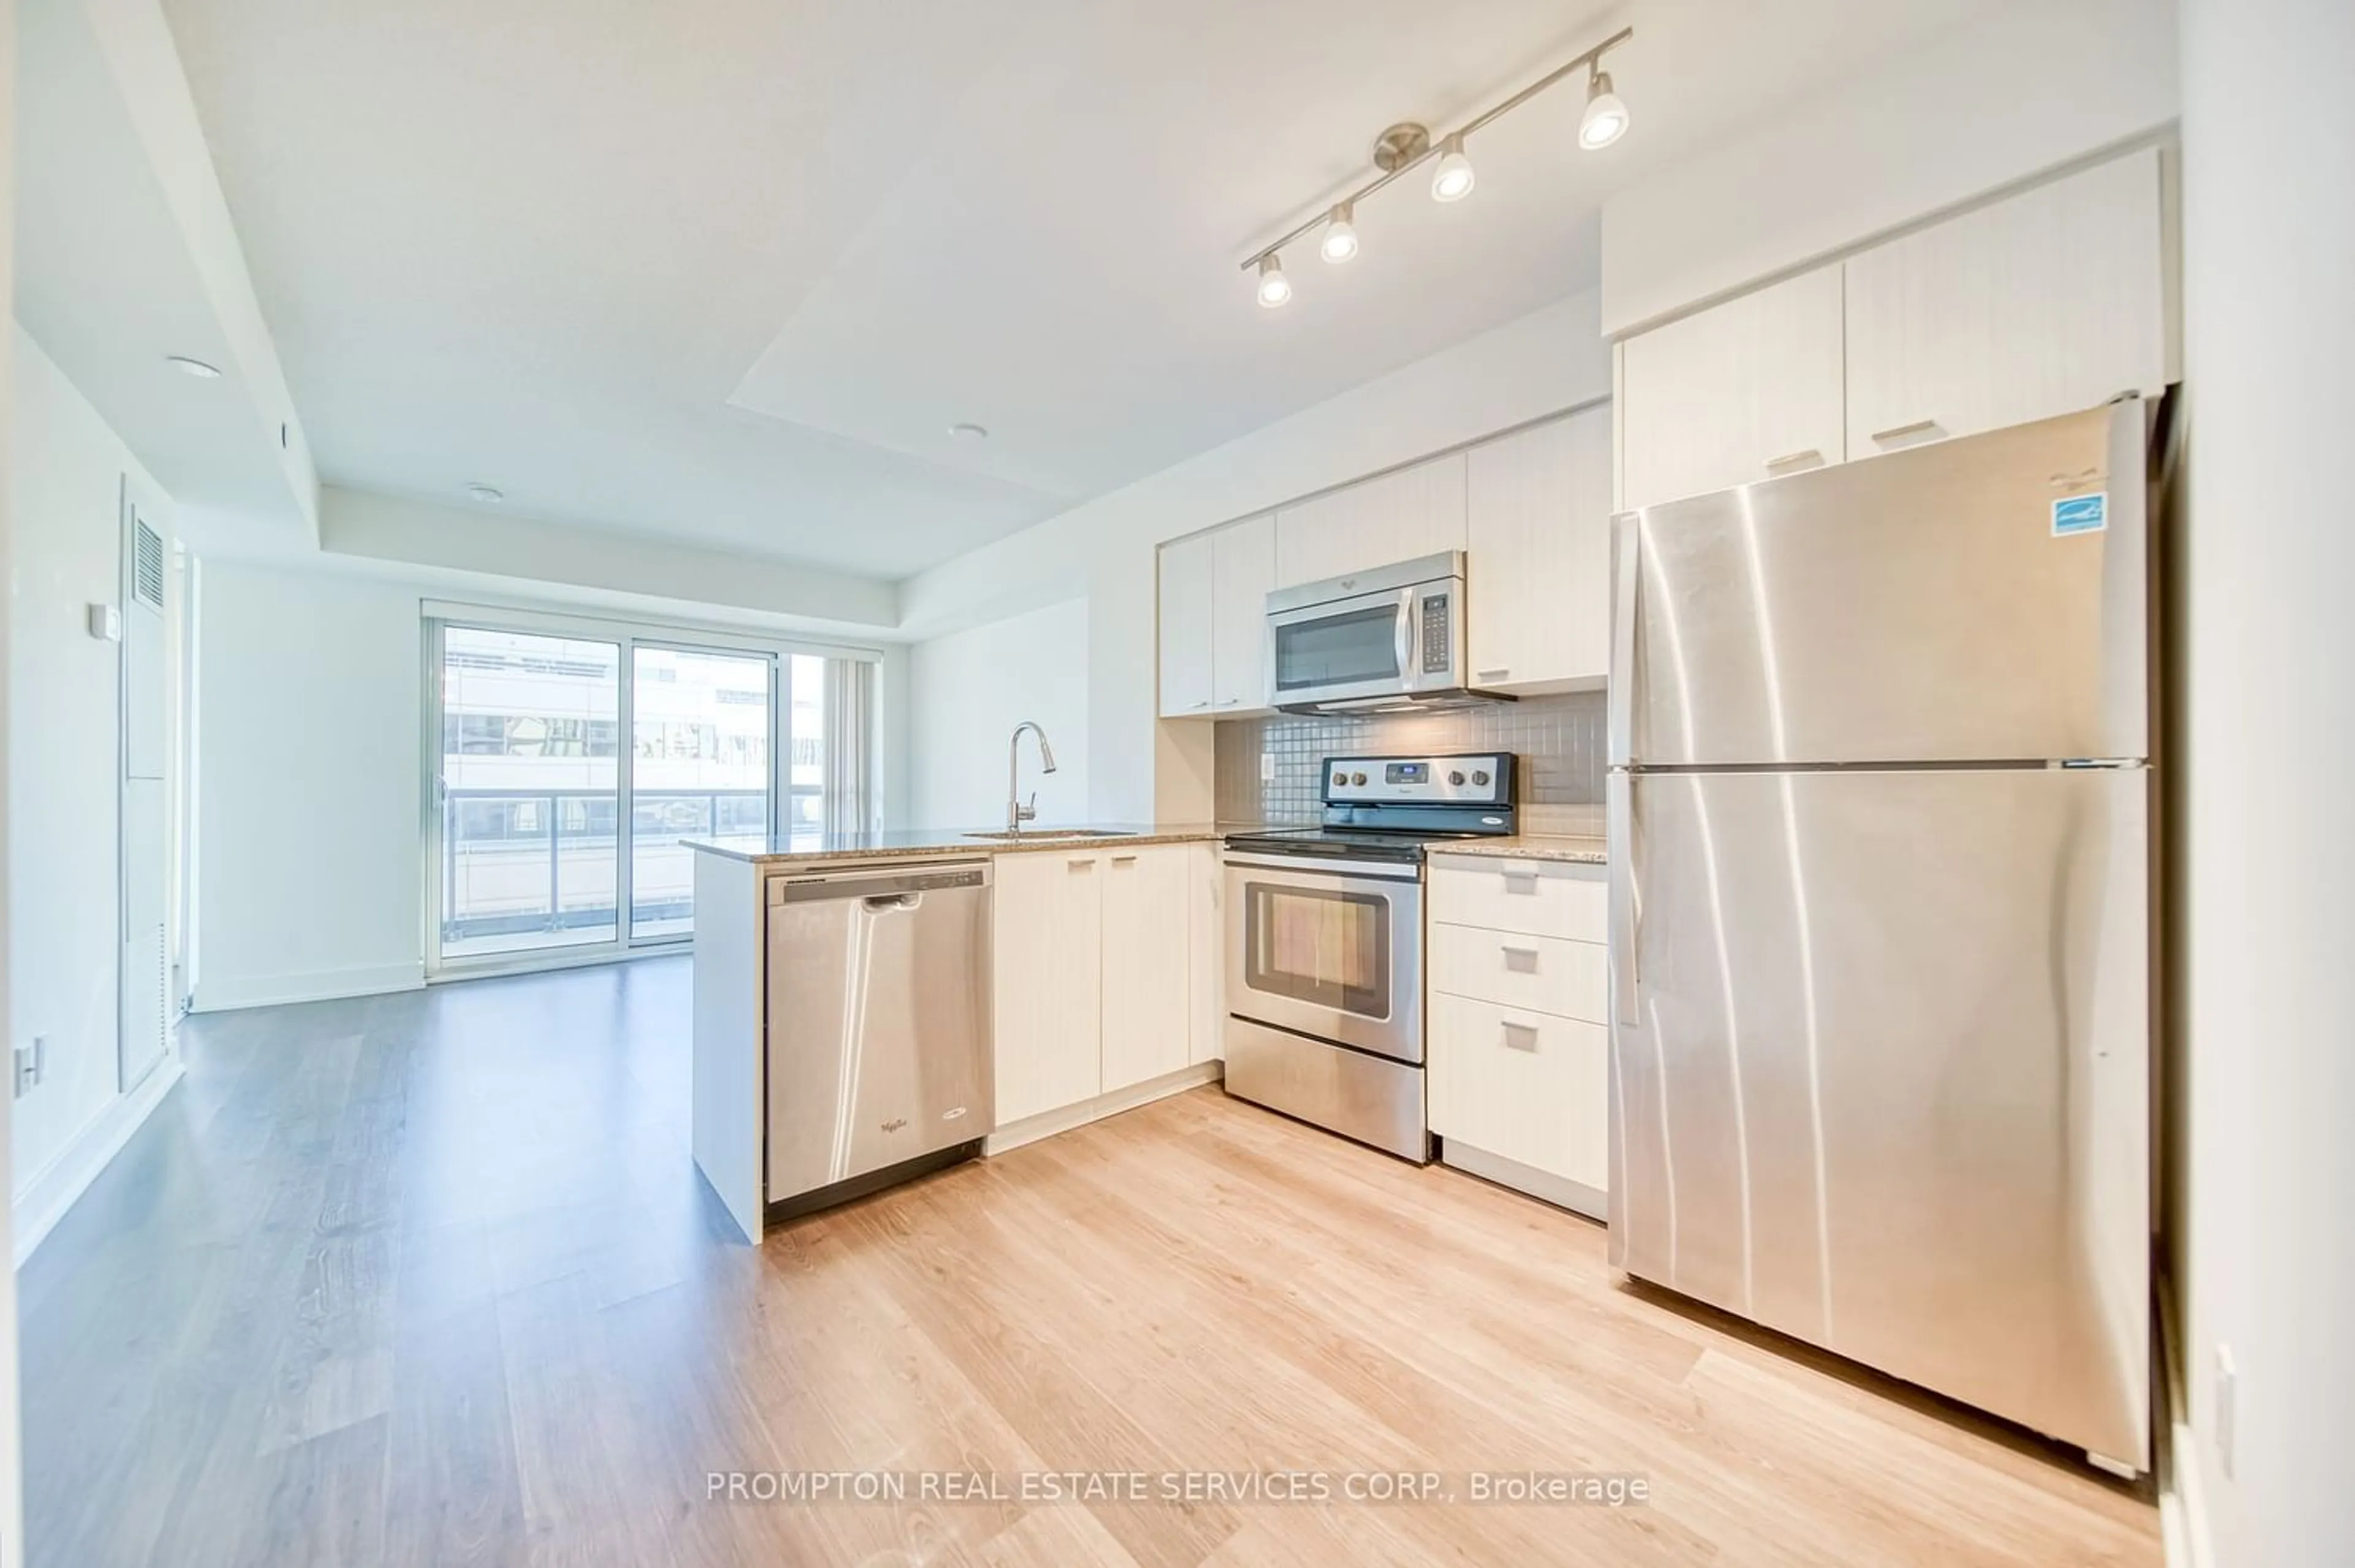 Standard kitchen for 88 Sheppard Ave #503, Toronto Ontario M2N 0G9